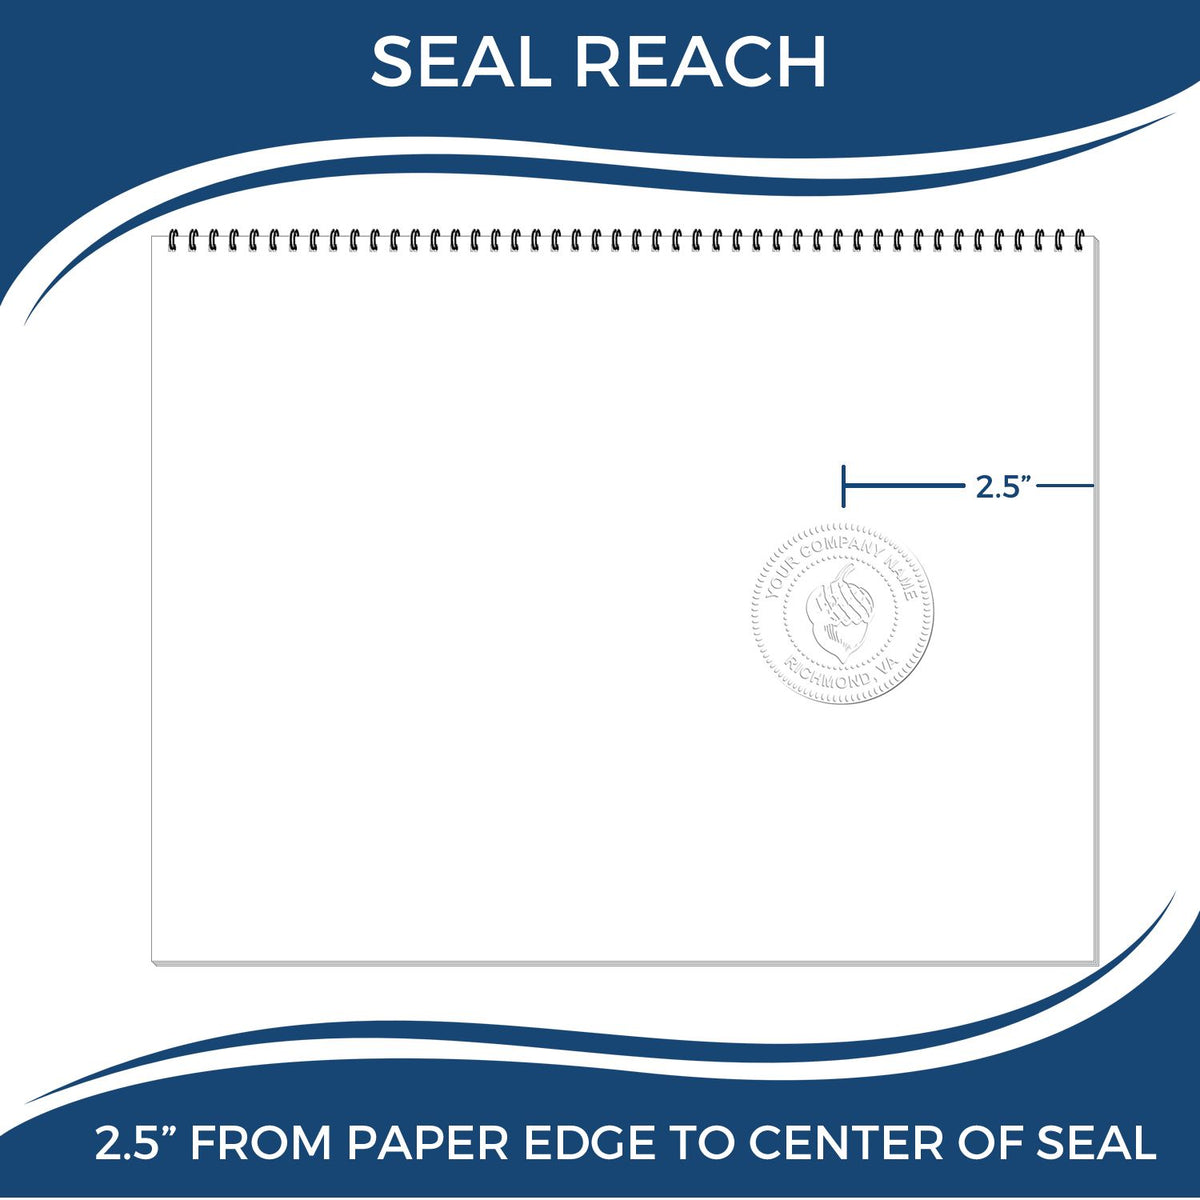 An infographic showing the seal reach which is represented by a ruler and a miniature seal image of the Heavy Duty Cast Iron South Dakota Architect Embosser